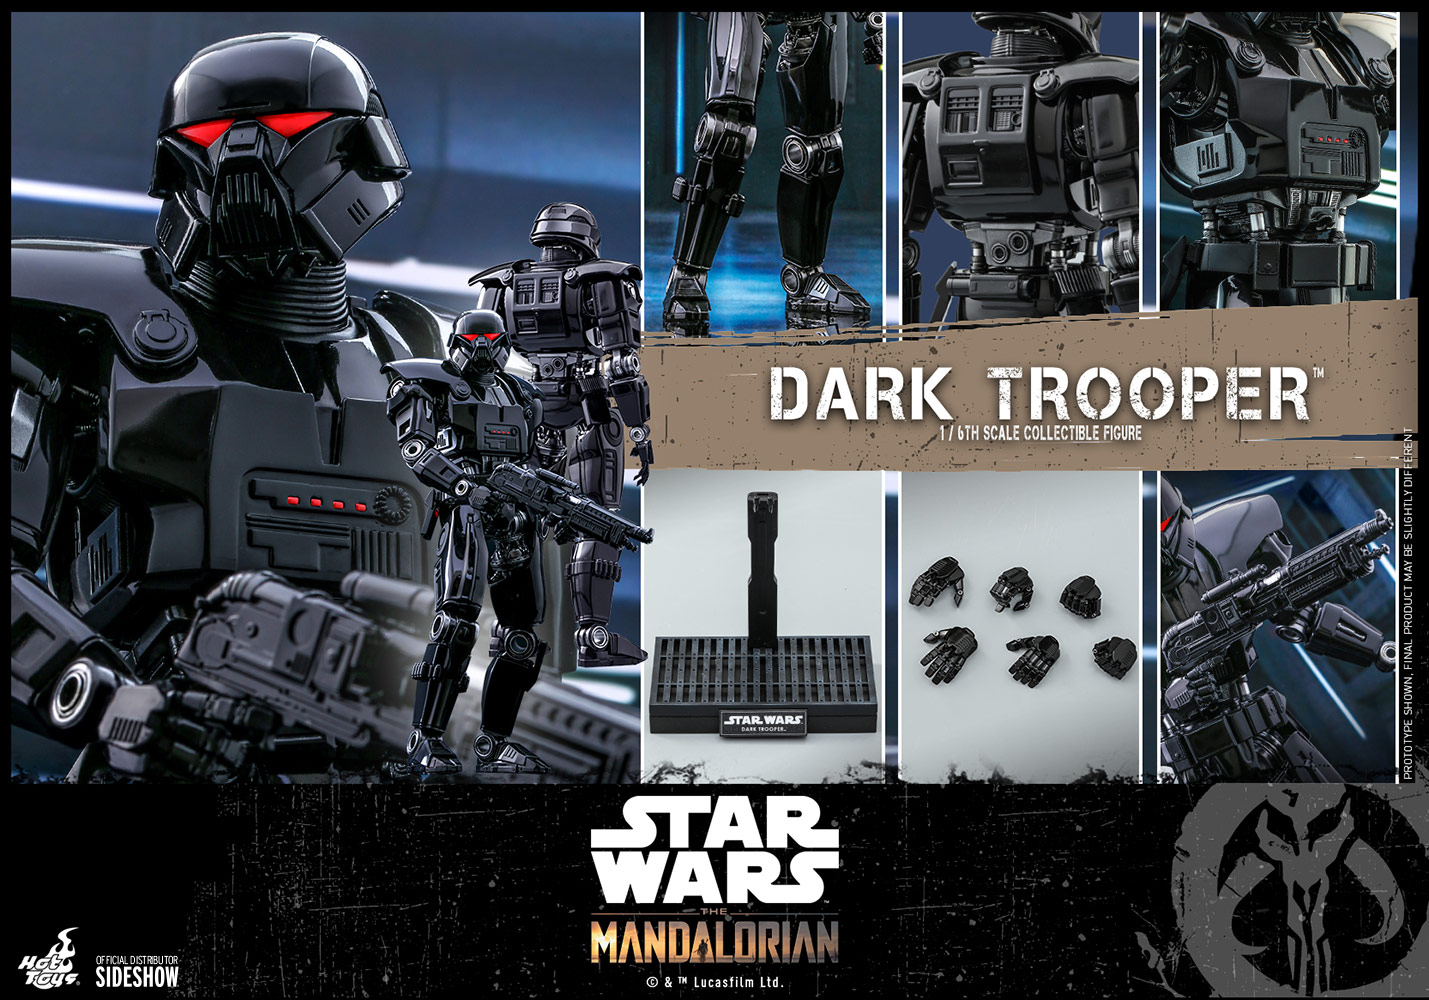 Dark Trooper The Mandalorian Sixth Scale Figure By Hot Toys